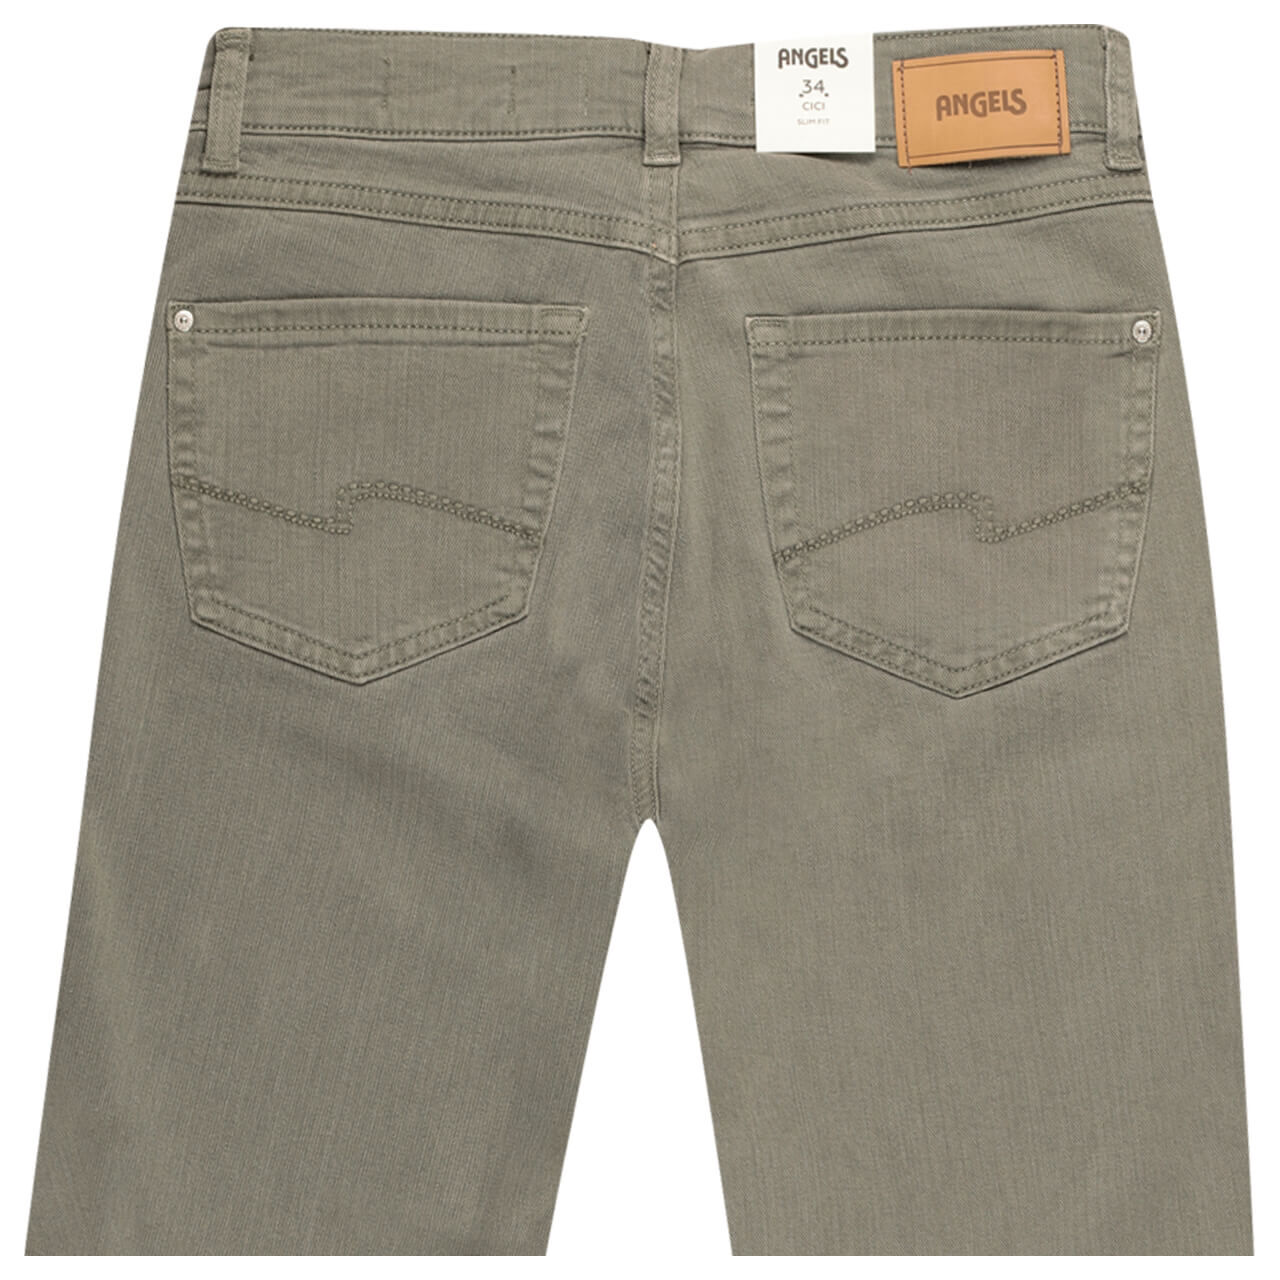 Angels Cici Jeans past olive used